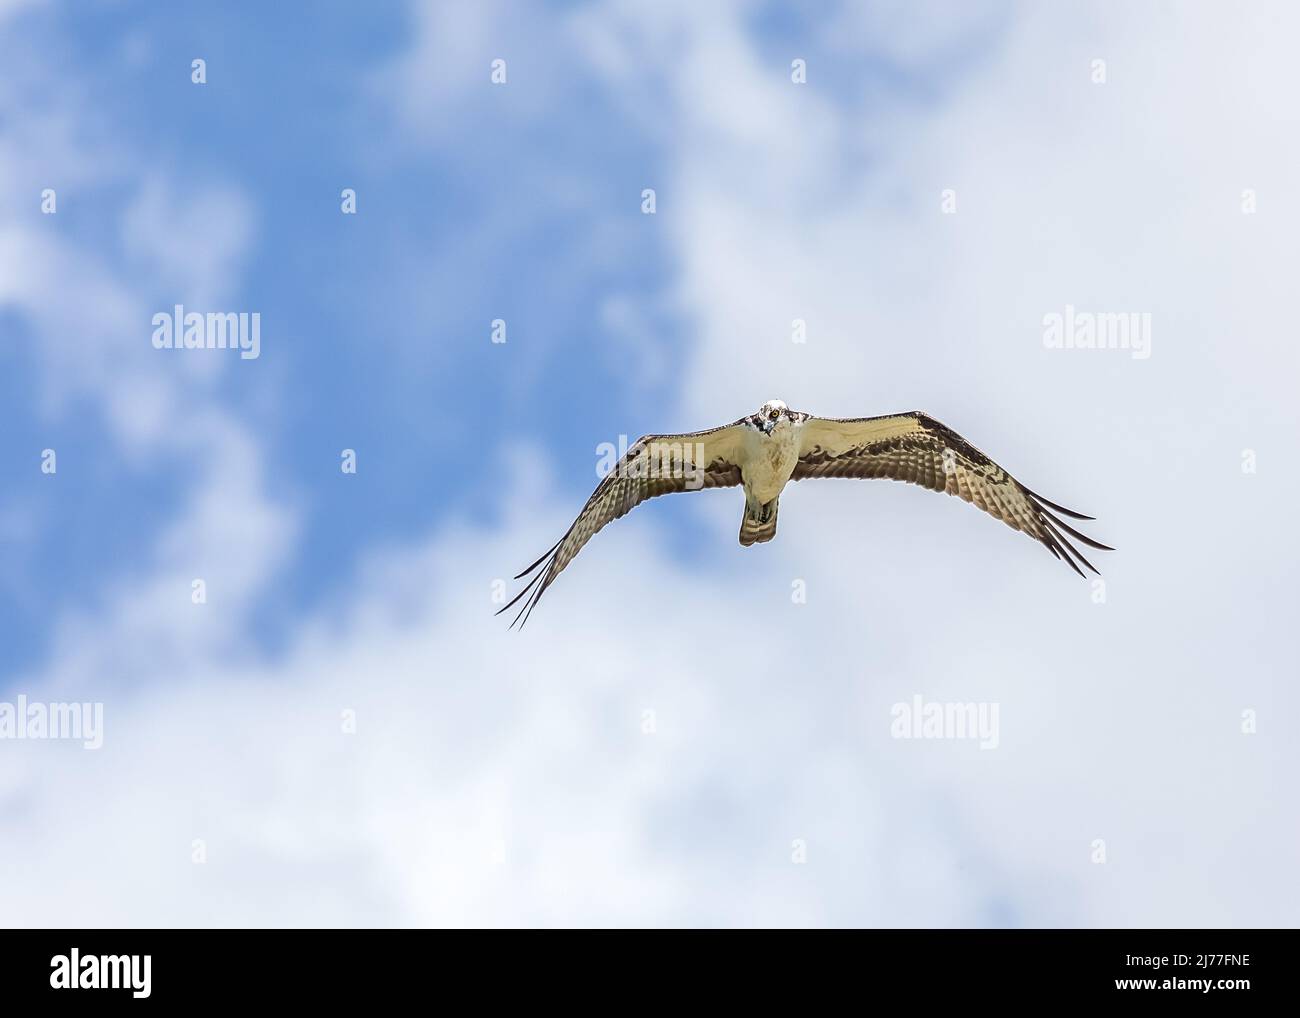 Osprey soaring over the ponds and marsh at Sweetwater wetlands park in Florida Stock Photo